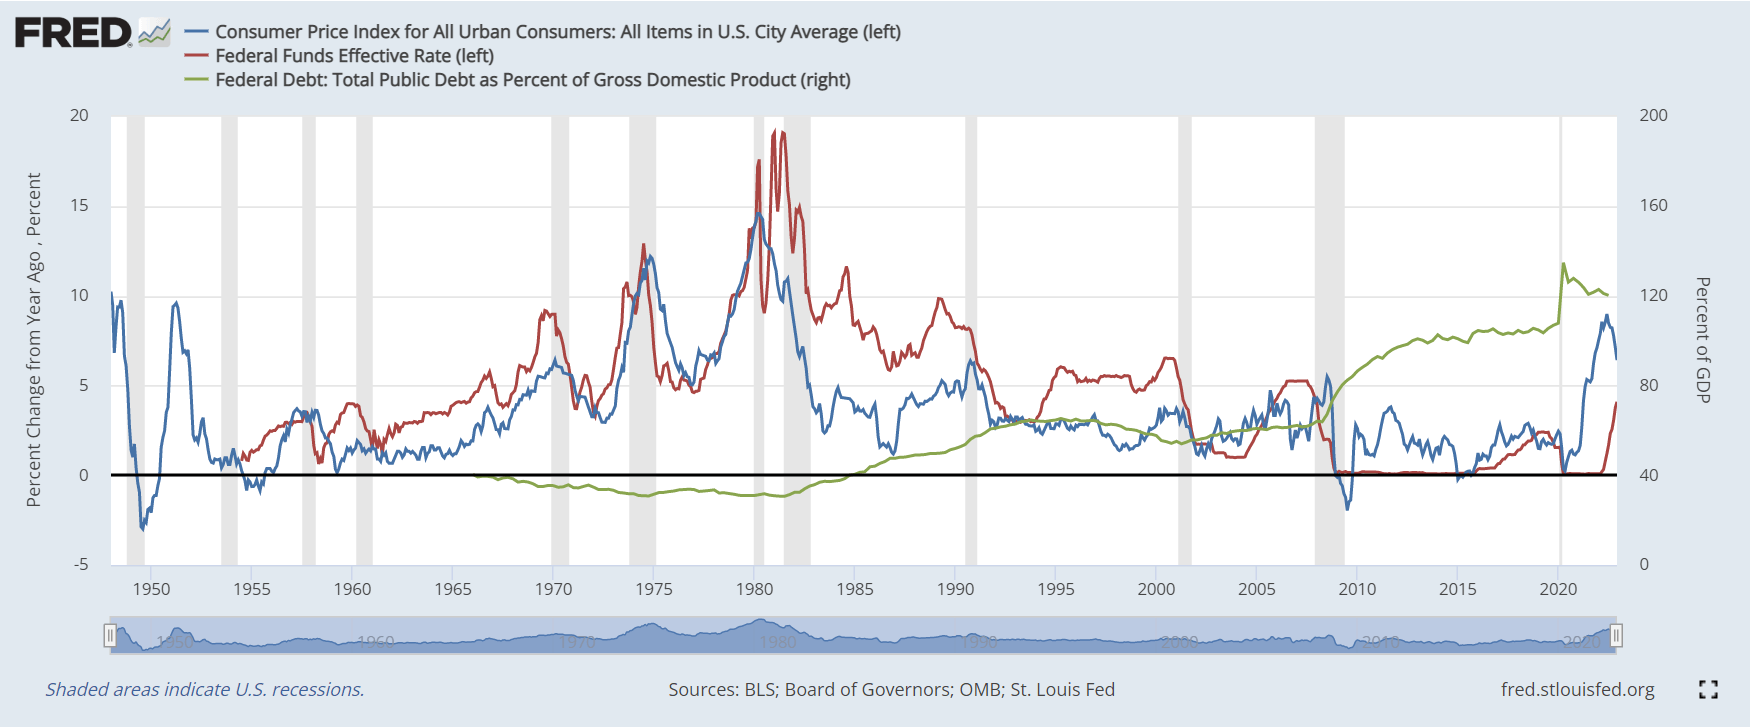 Consumer Price Index, Fed Funds, Debt vs GDP